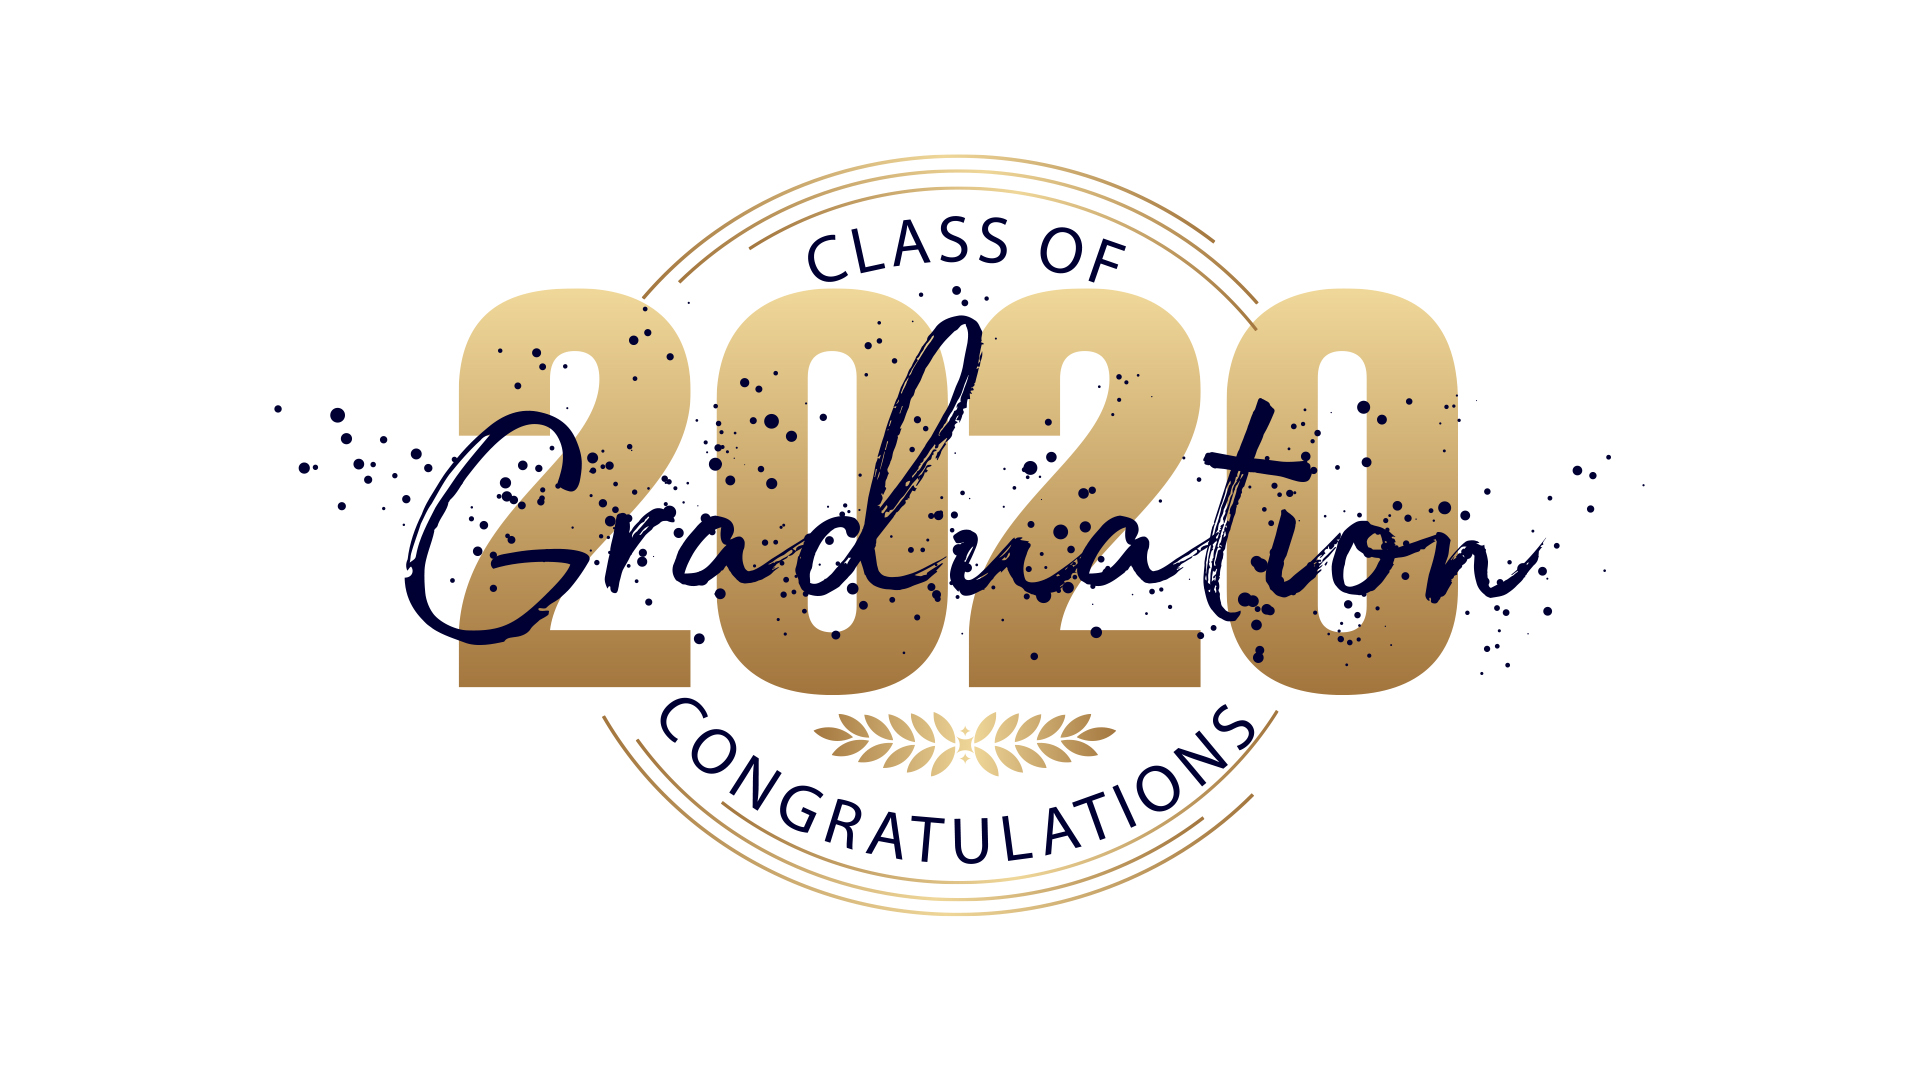 SCHEDULE FOR GRADUATION CEREMONIES ANNOUNCED – Sevier County School System